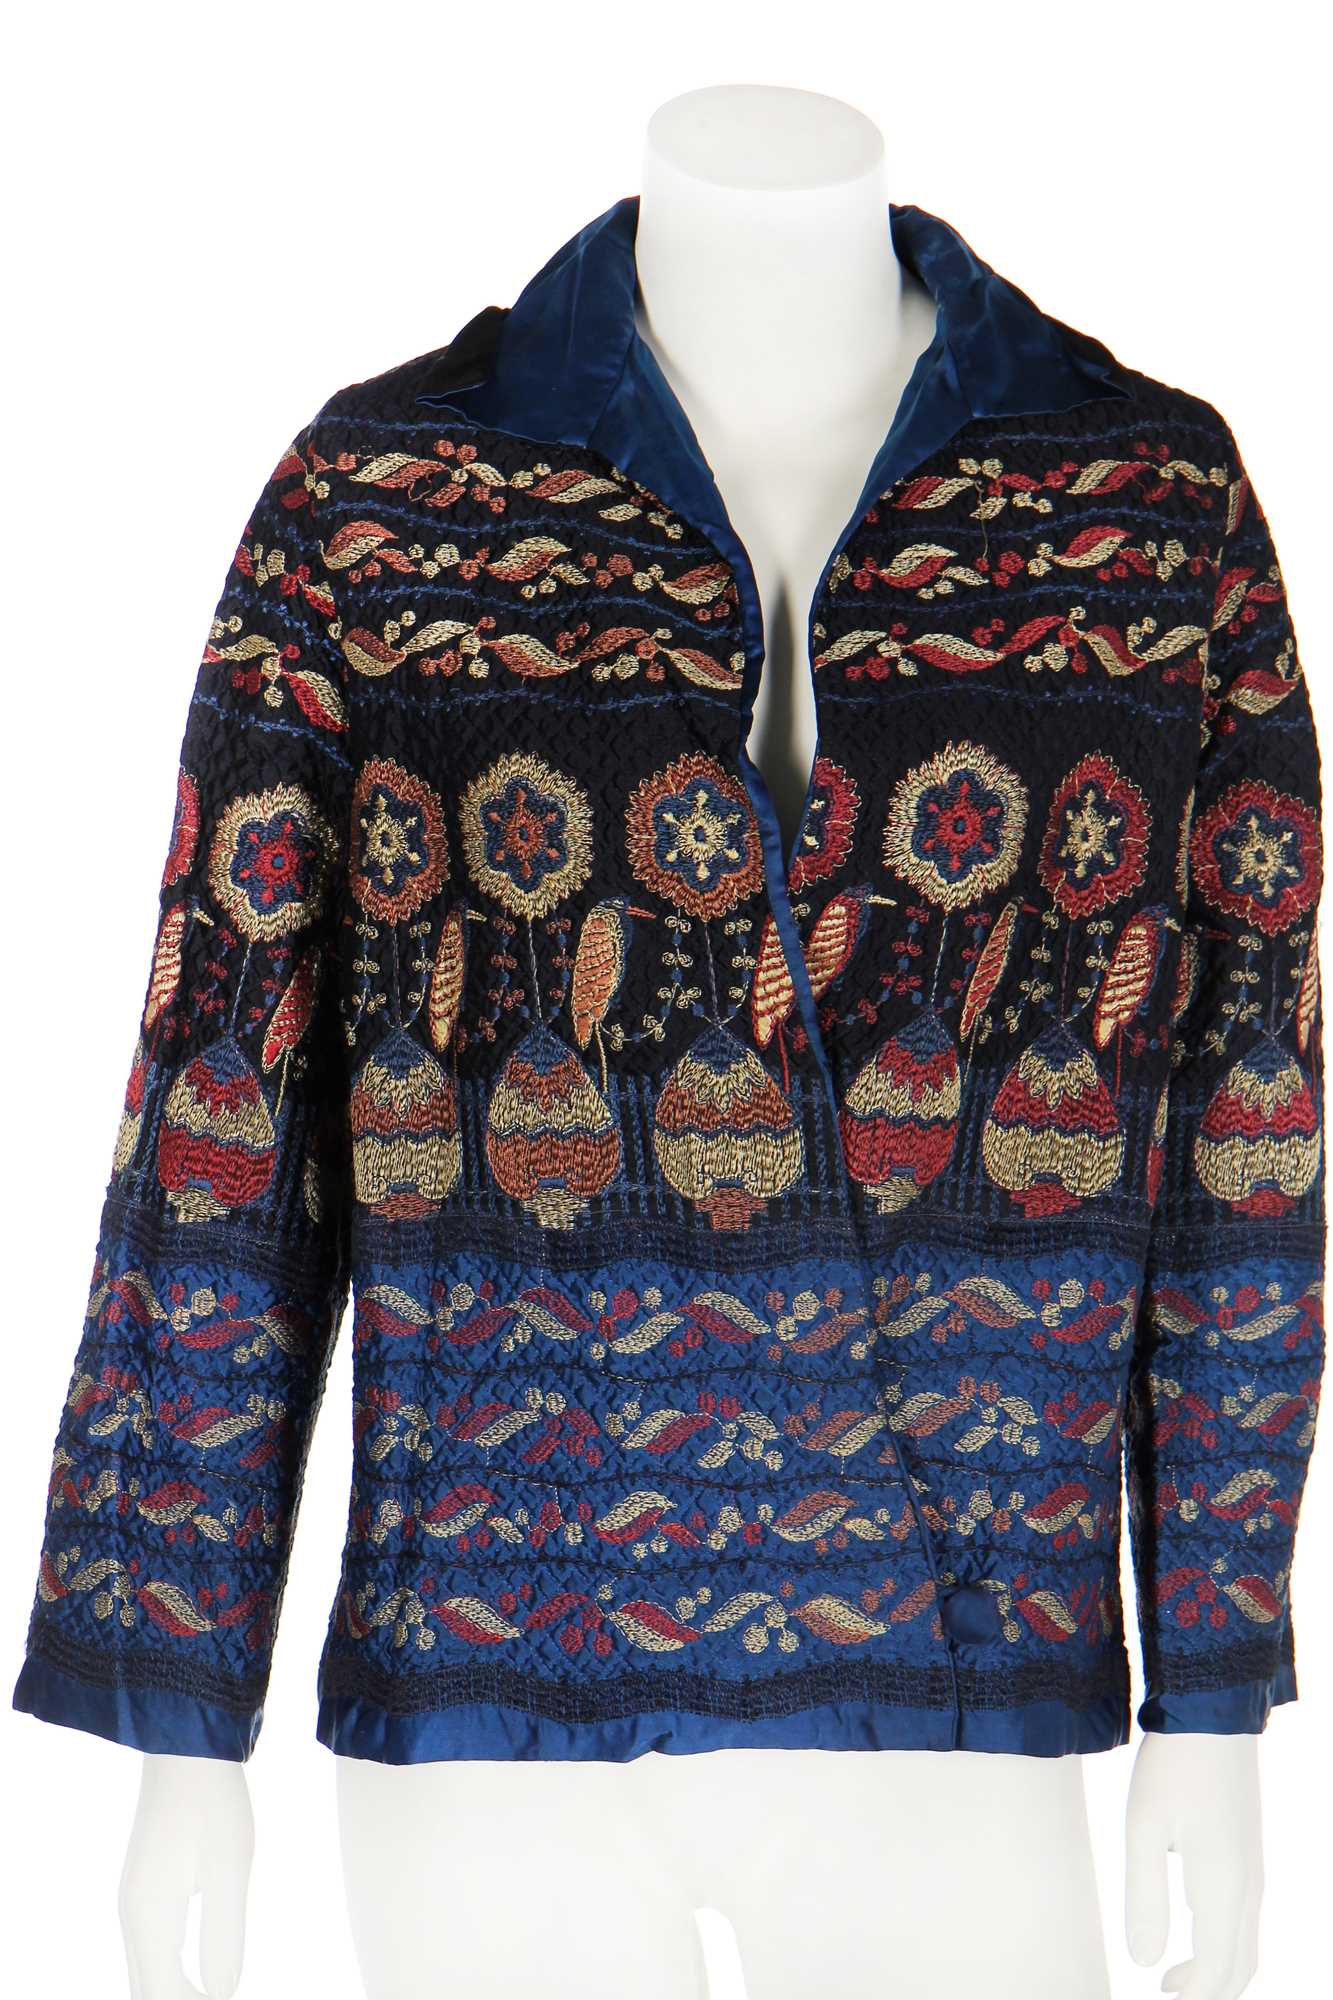 Lot 35 - A quilted silk jacket with Ottoman-inspired embroidery, 1920s